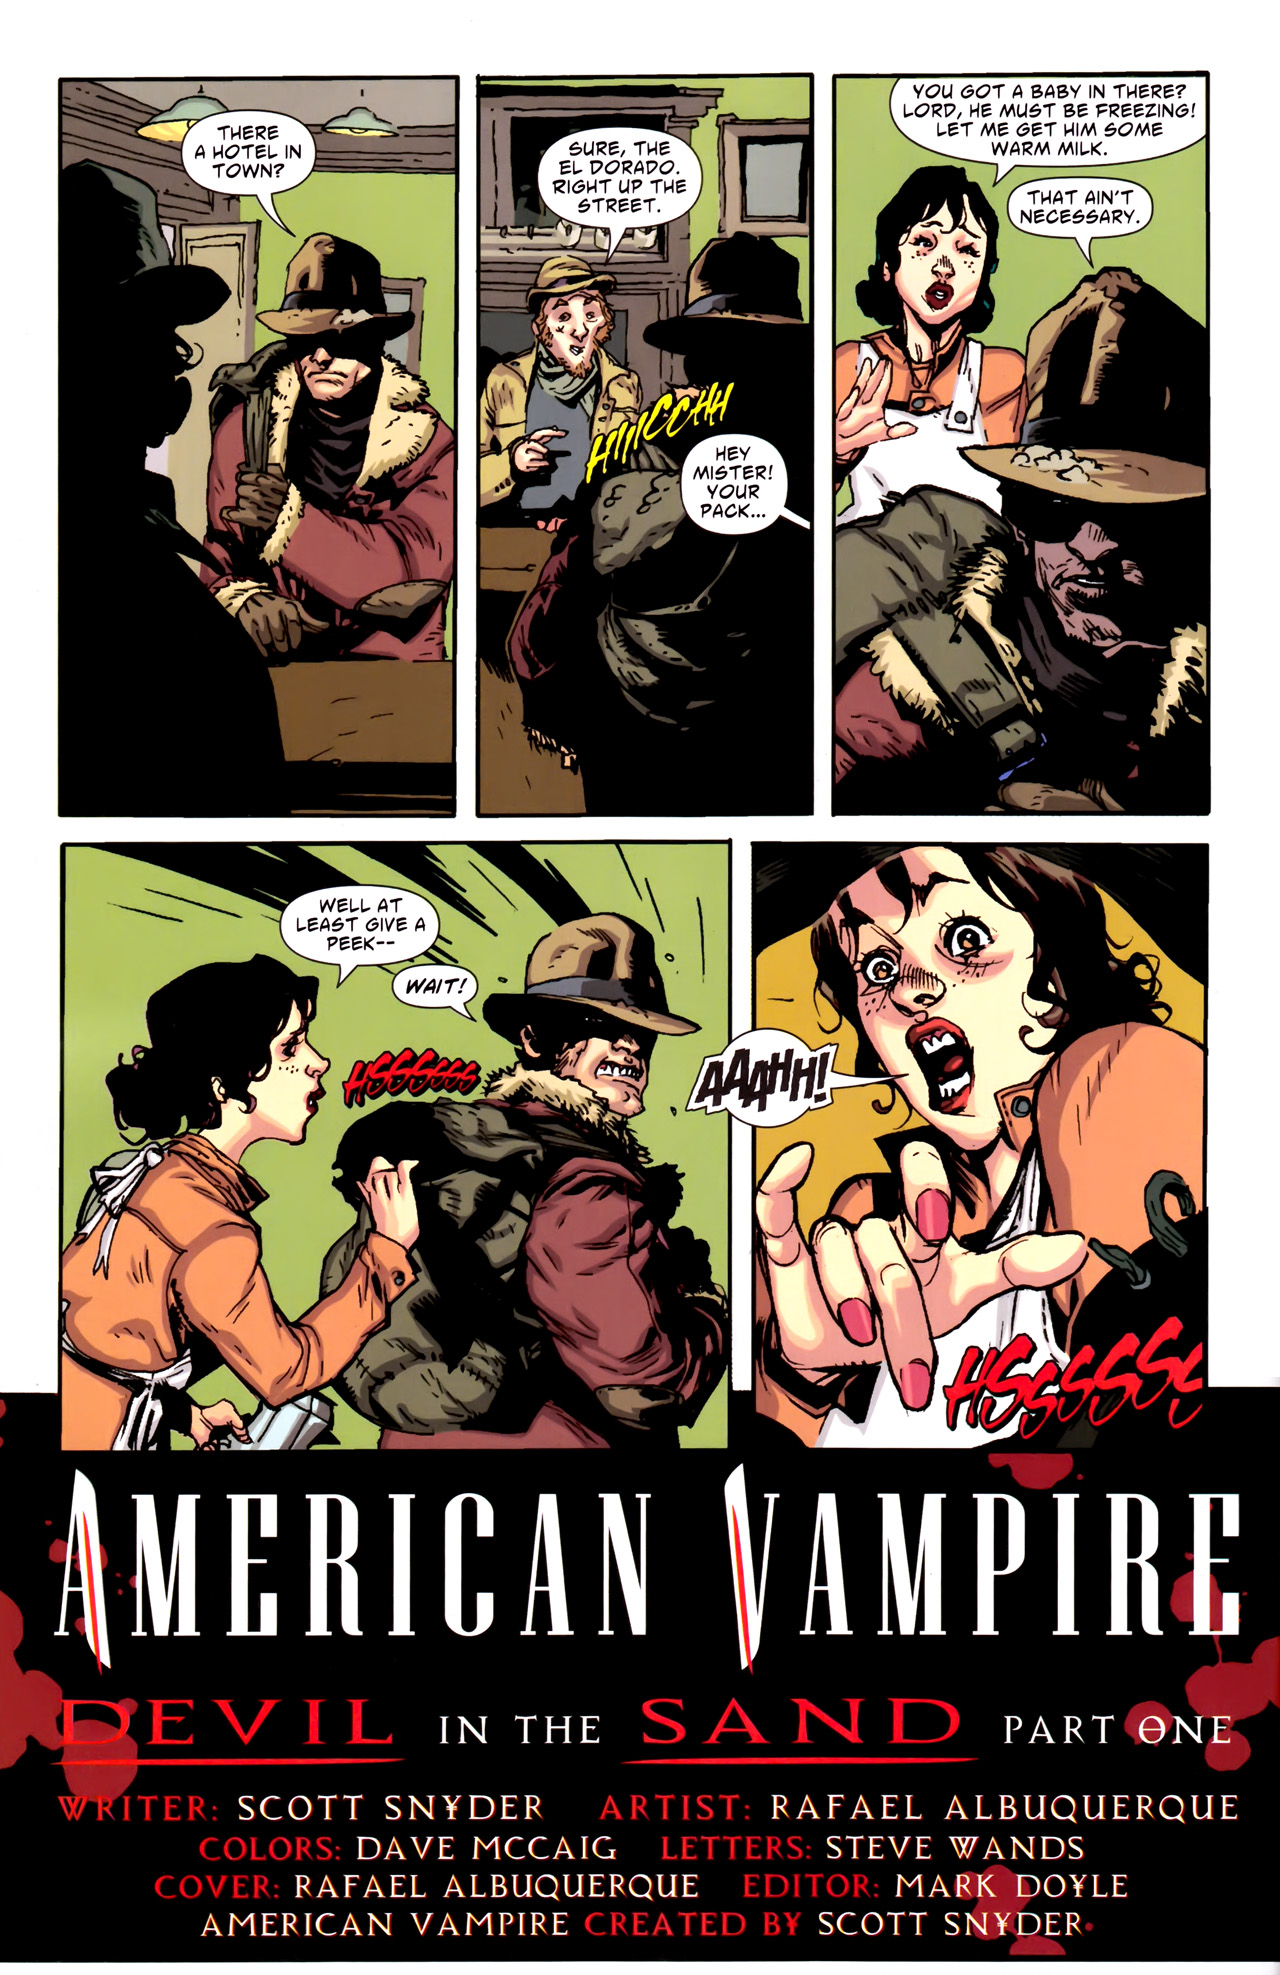 American Vampire #6 - Devil in the Sand, Part One 